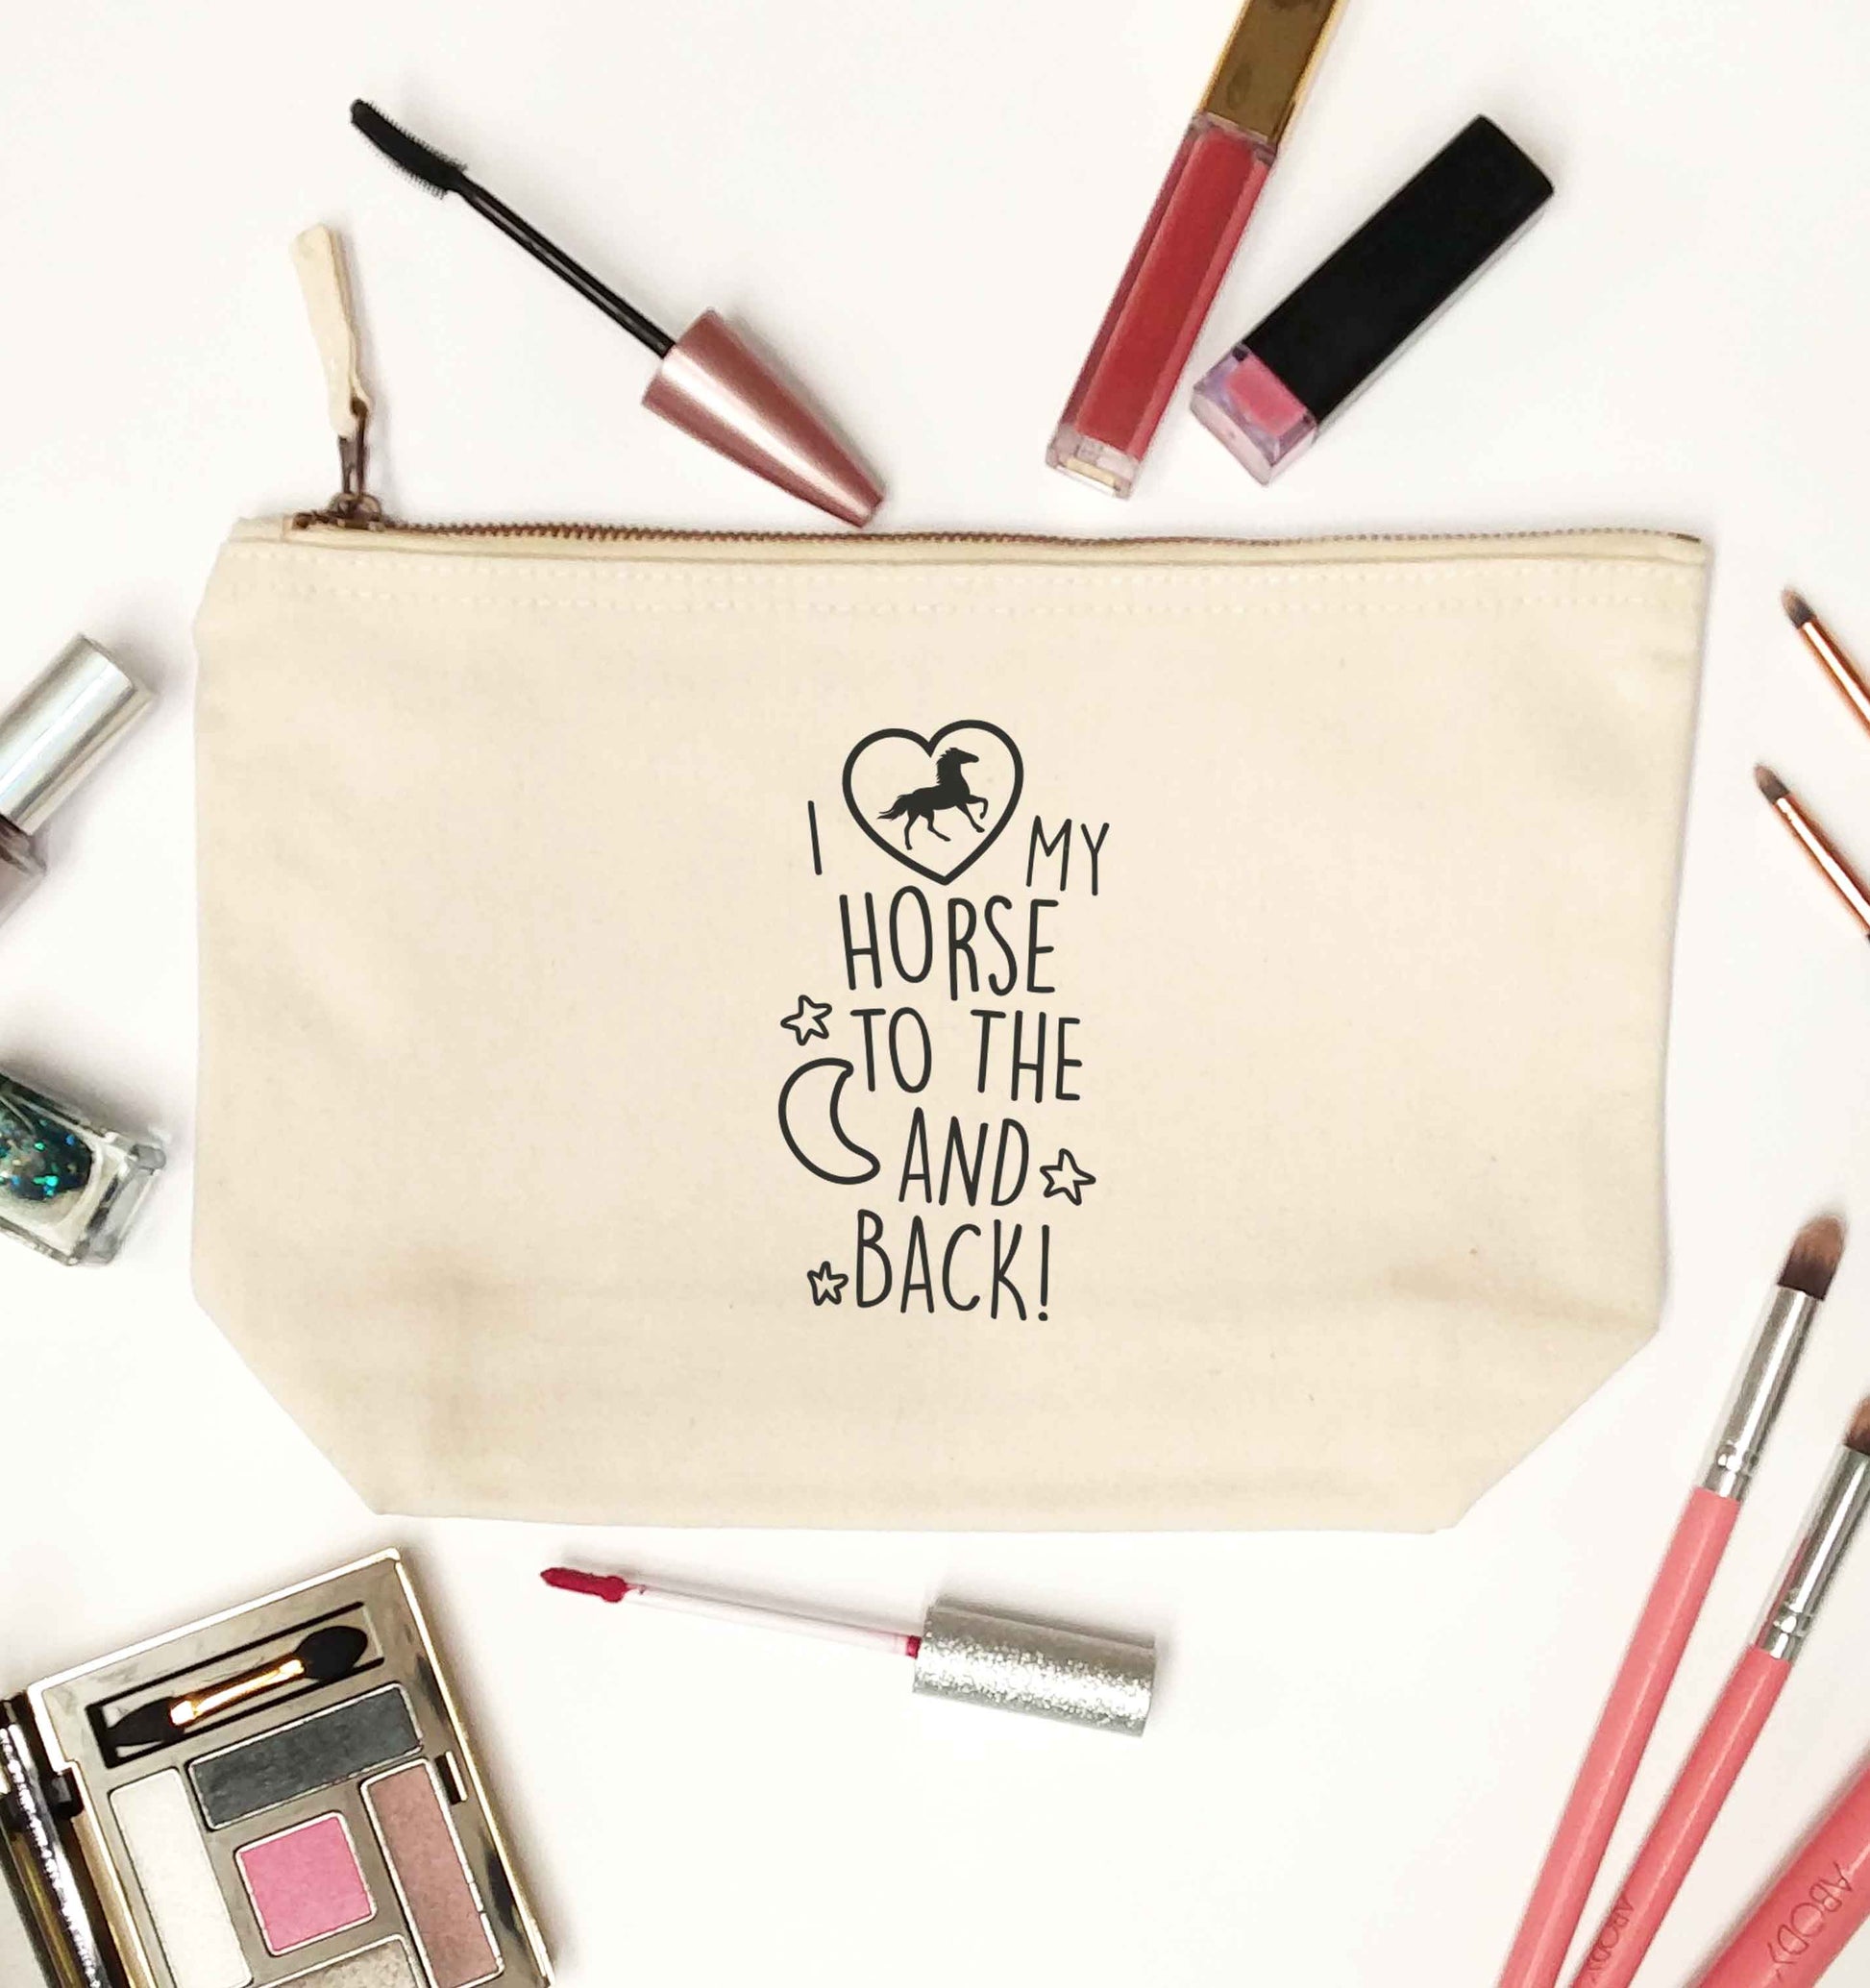 I love my horse to the moon and back natural makeup bag